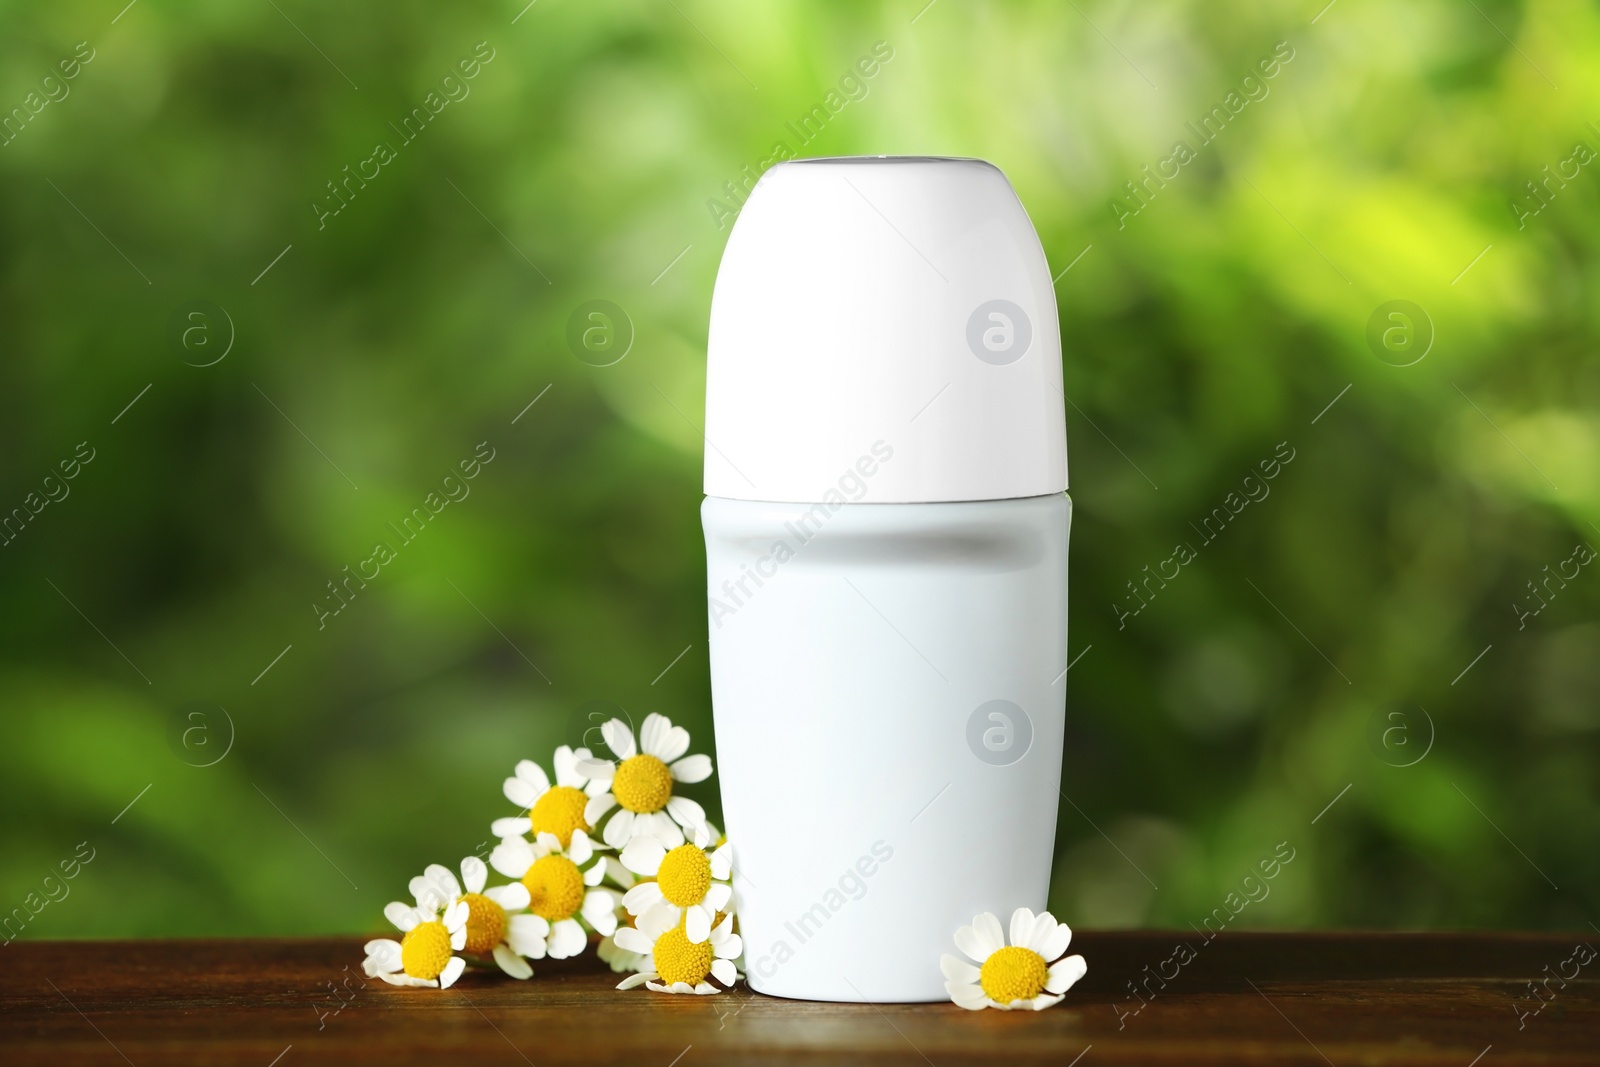 Photo of Natural female roll-on deodorant with chamomile flowers on wooden table against blurred green background